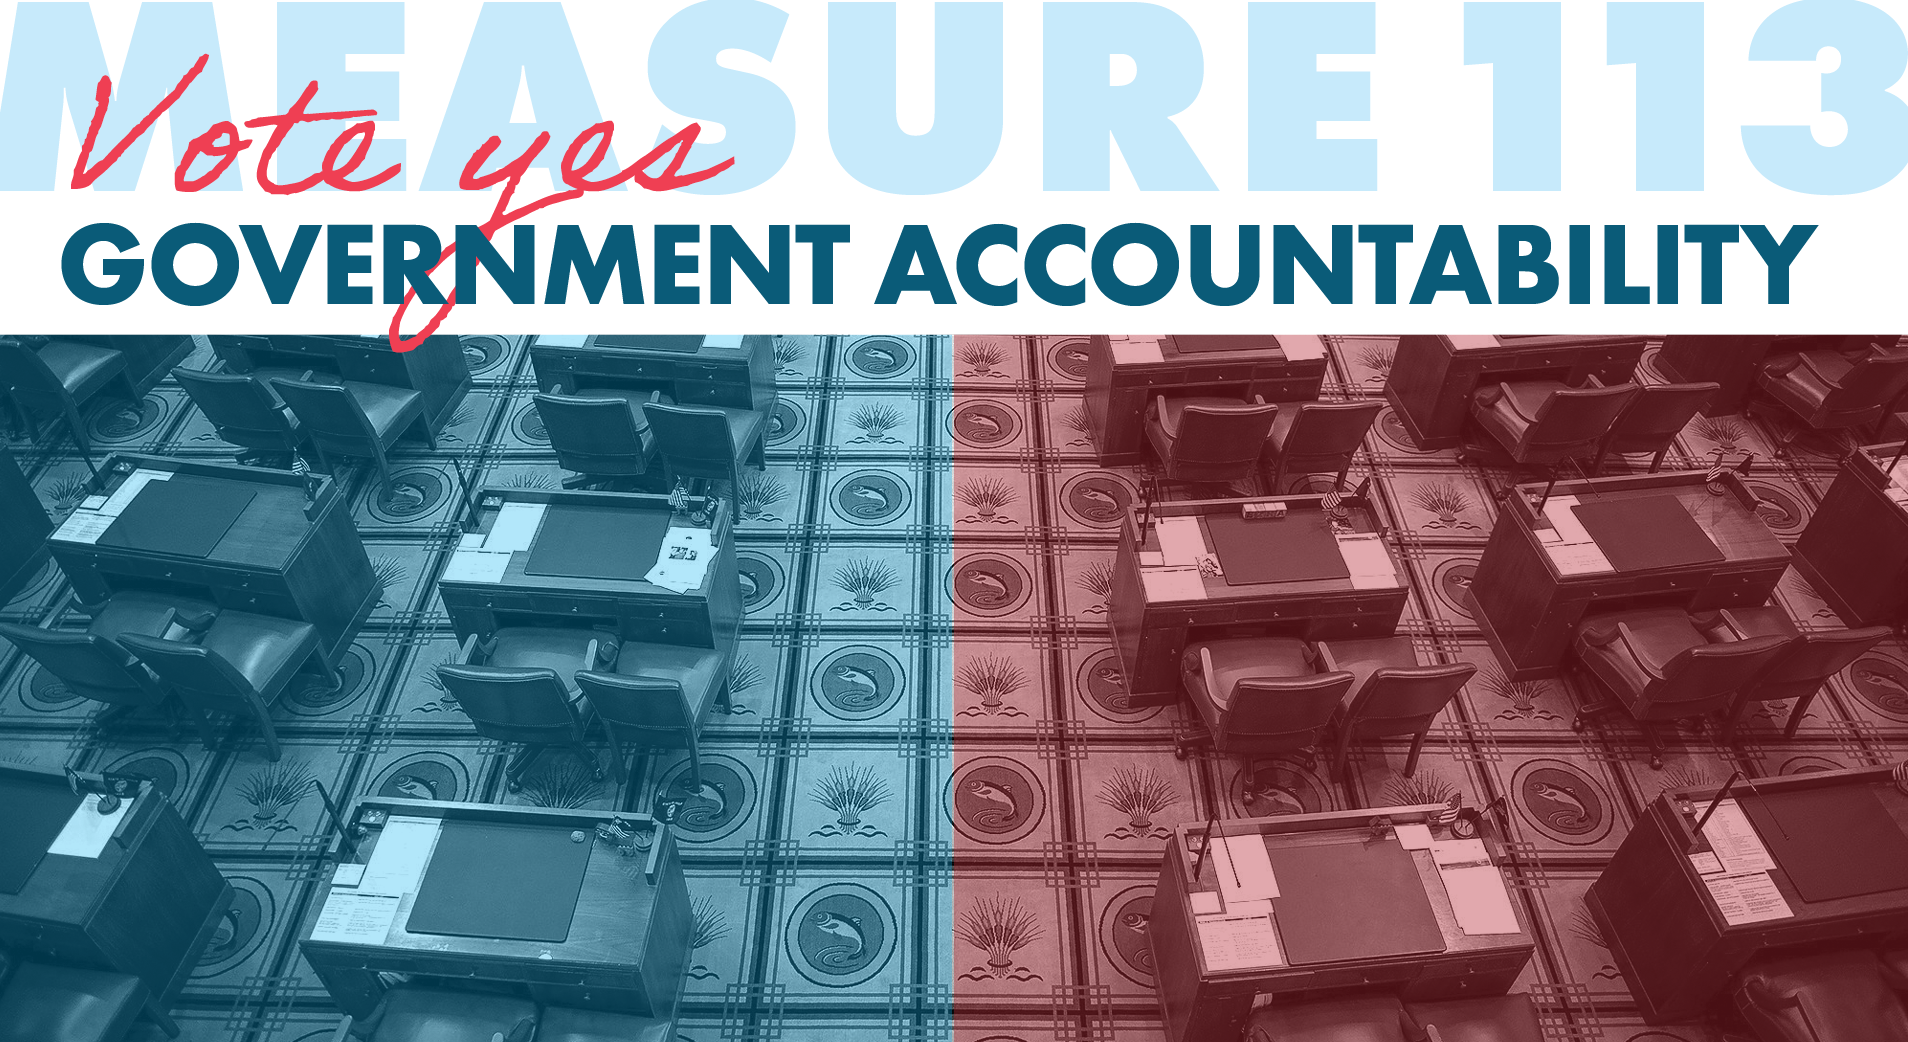 Measure 113: Government Accountability